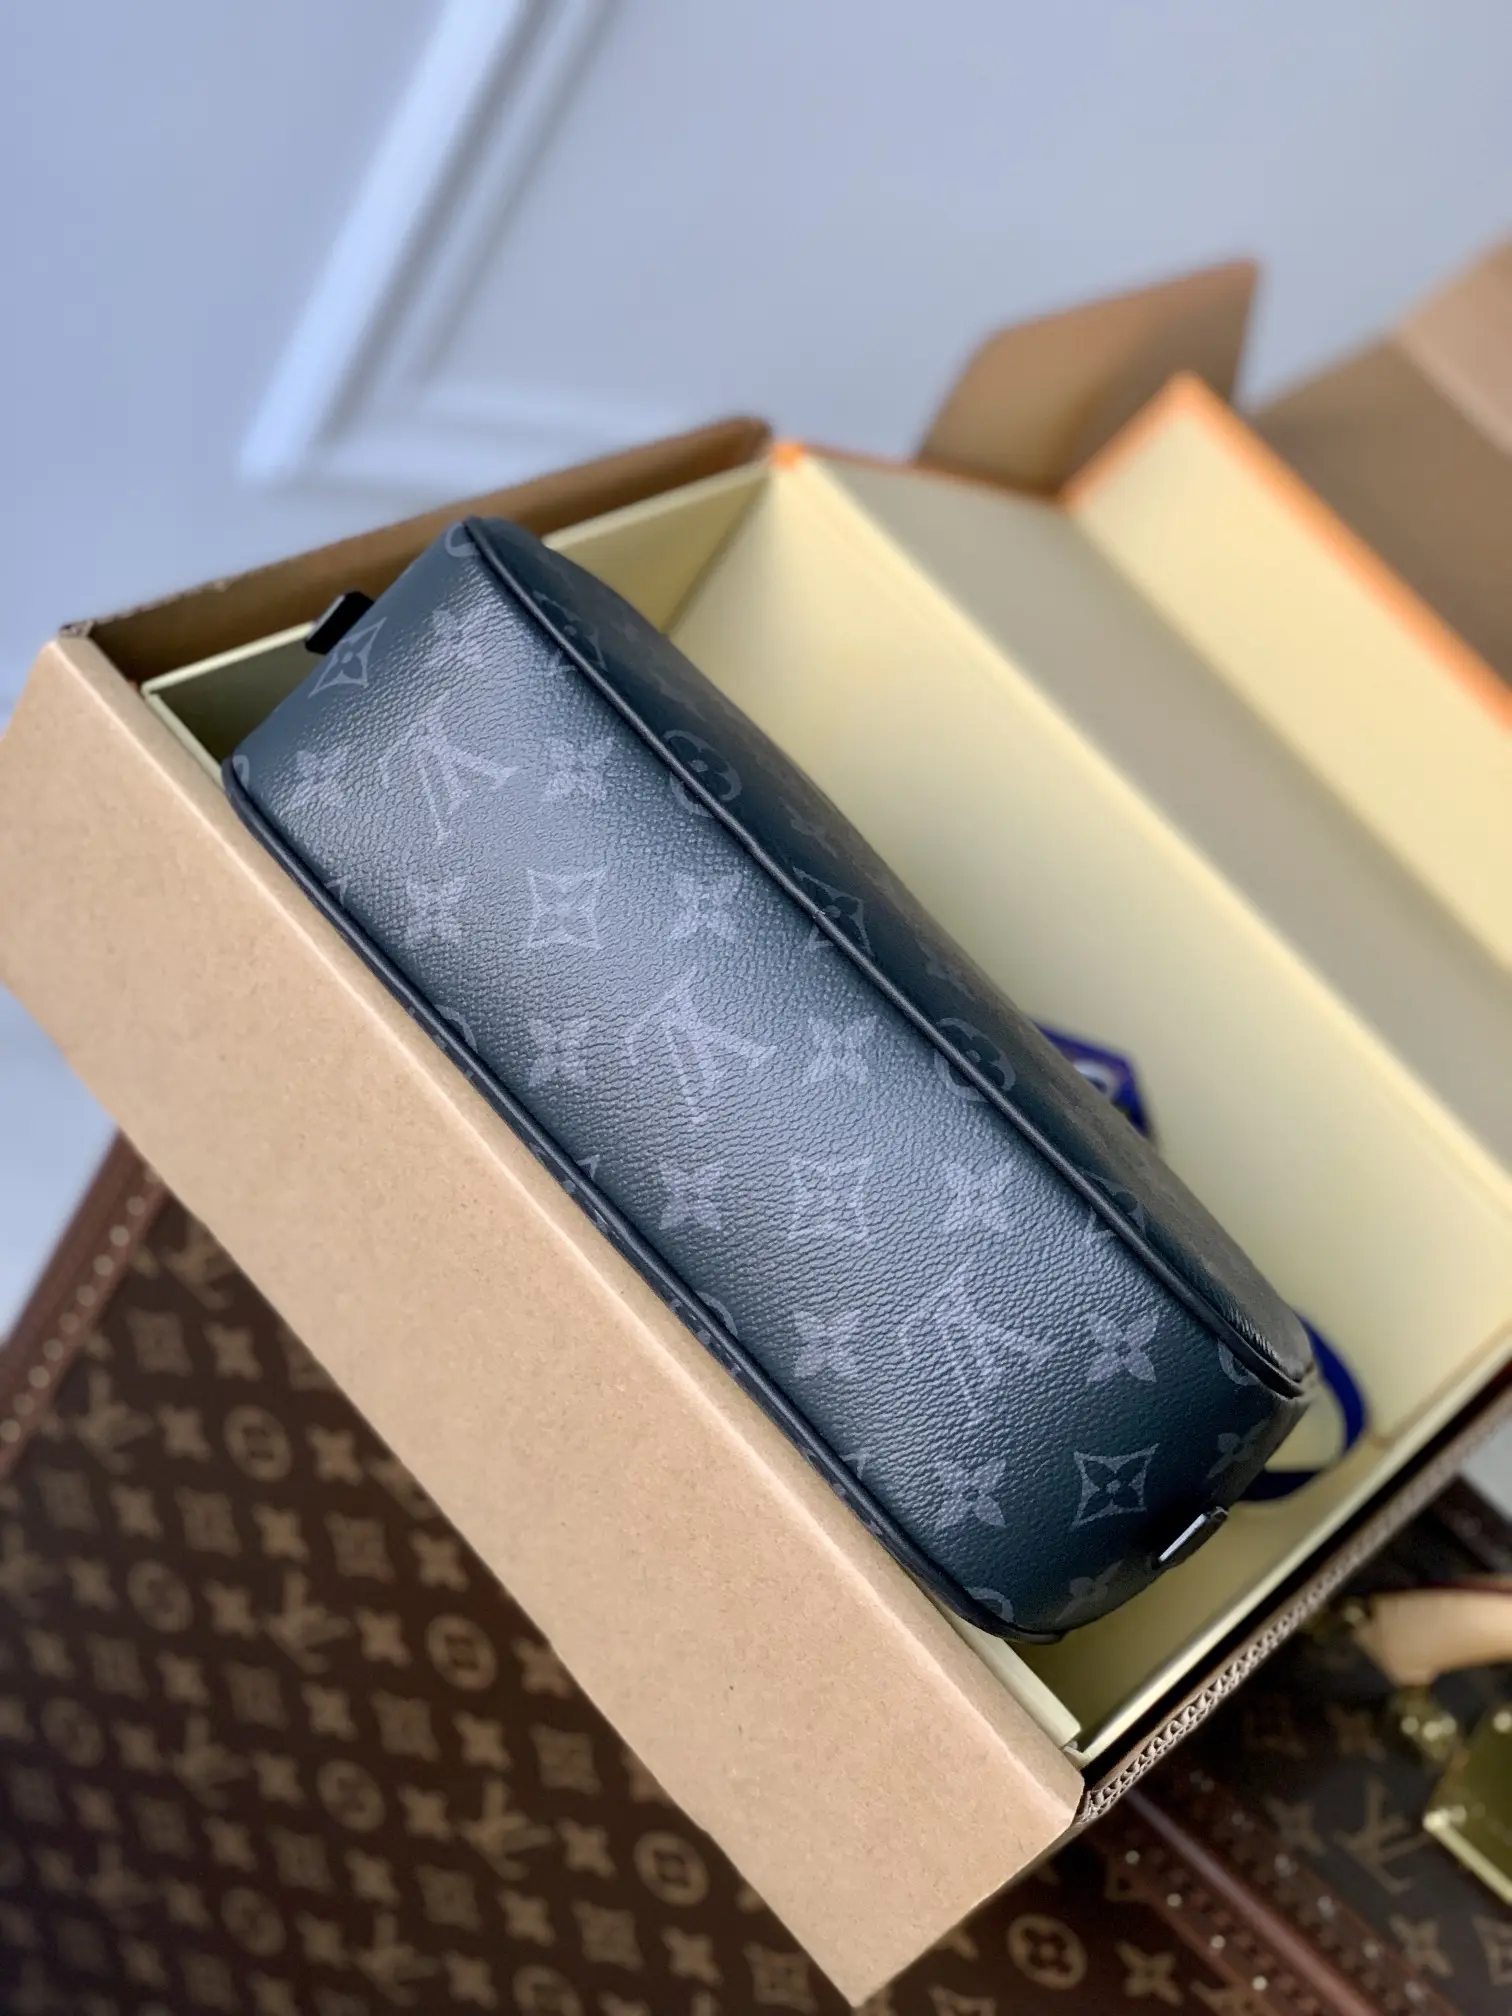 Louis Vuitton 2022 new small leather goods